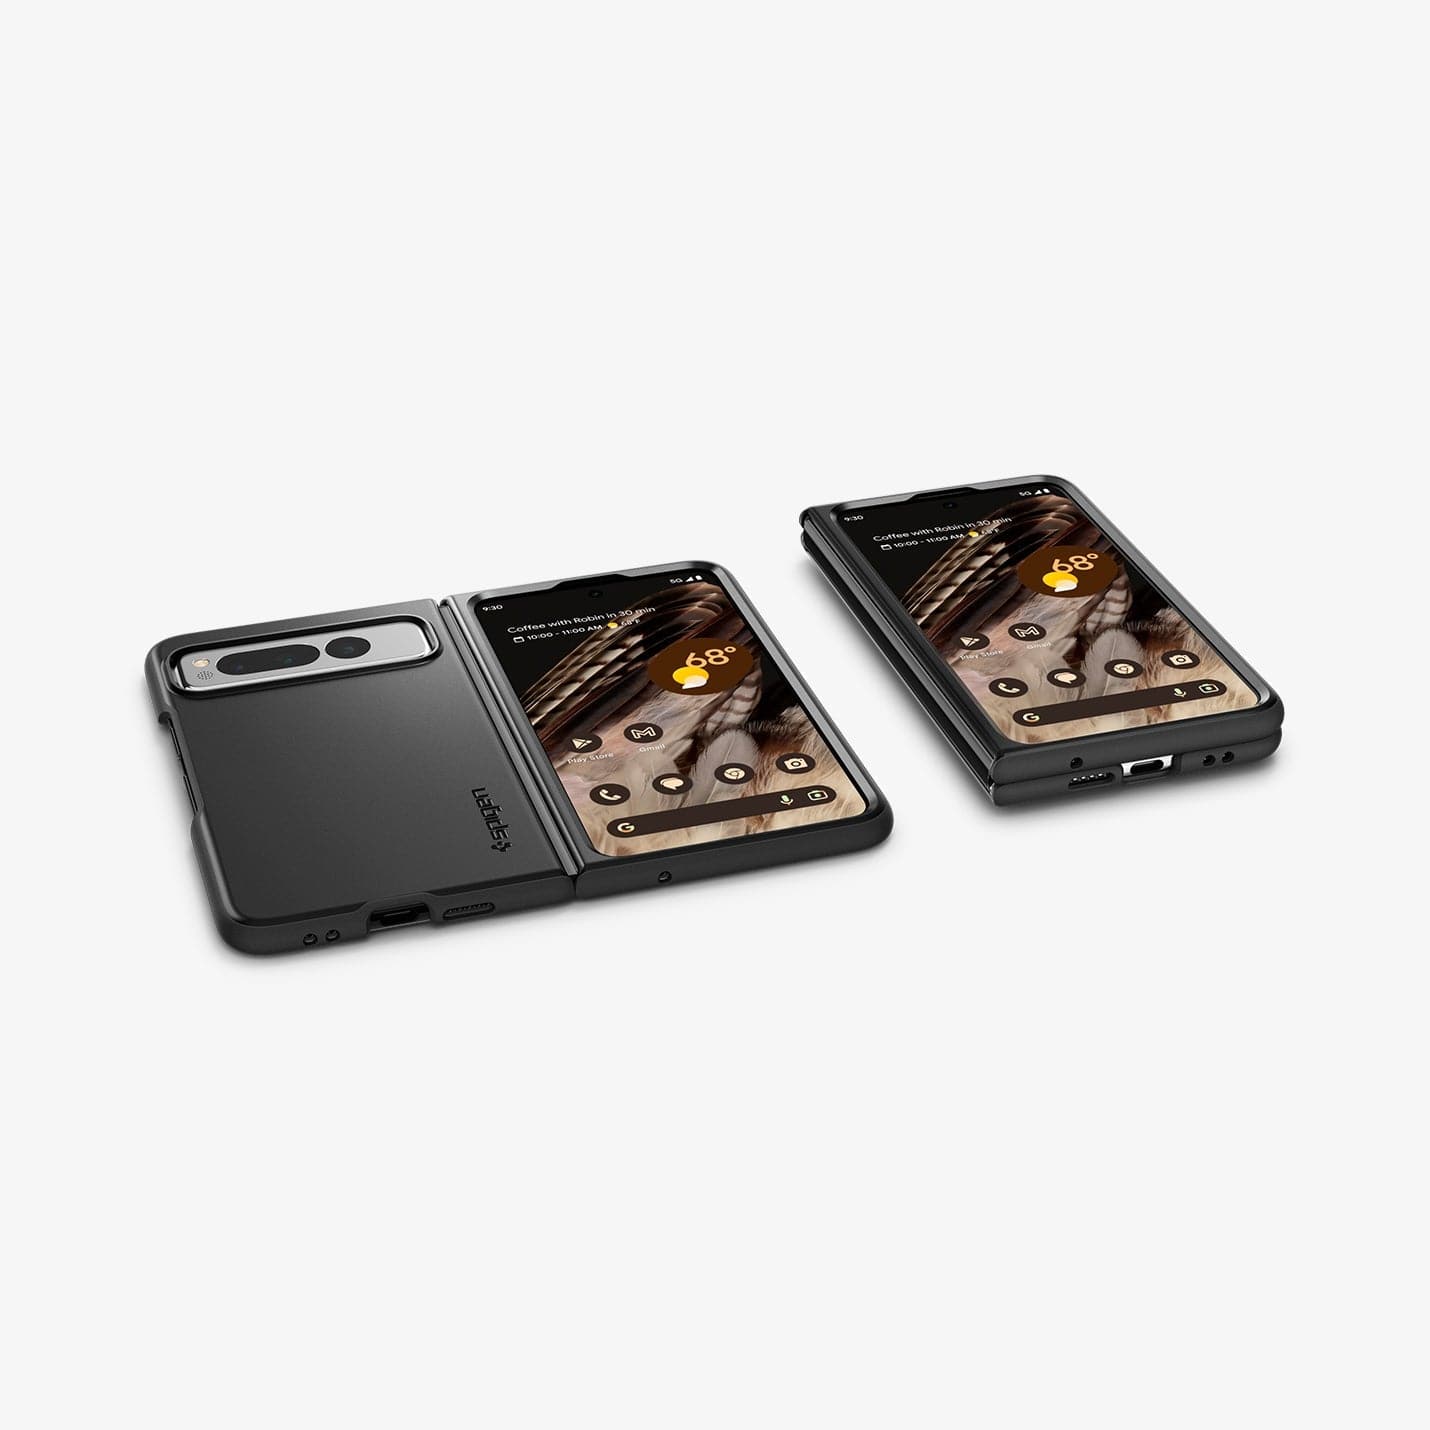 ACS05919 - Pixel Fold Series Case Thin Fit in black showing the back and front of one device and the front of another device